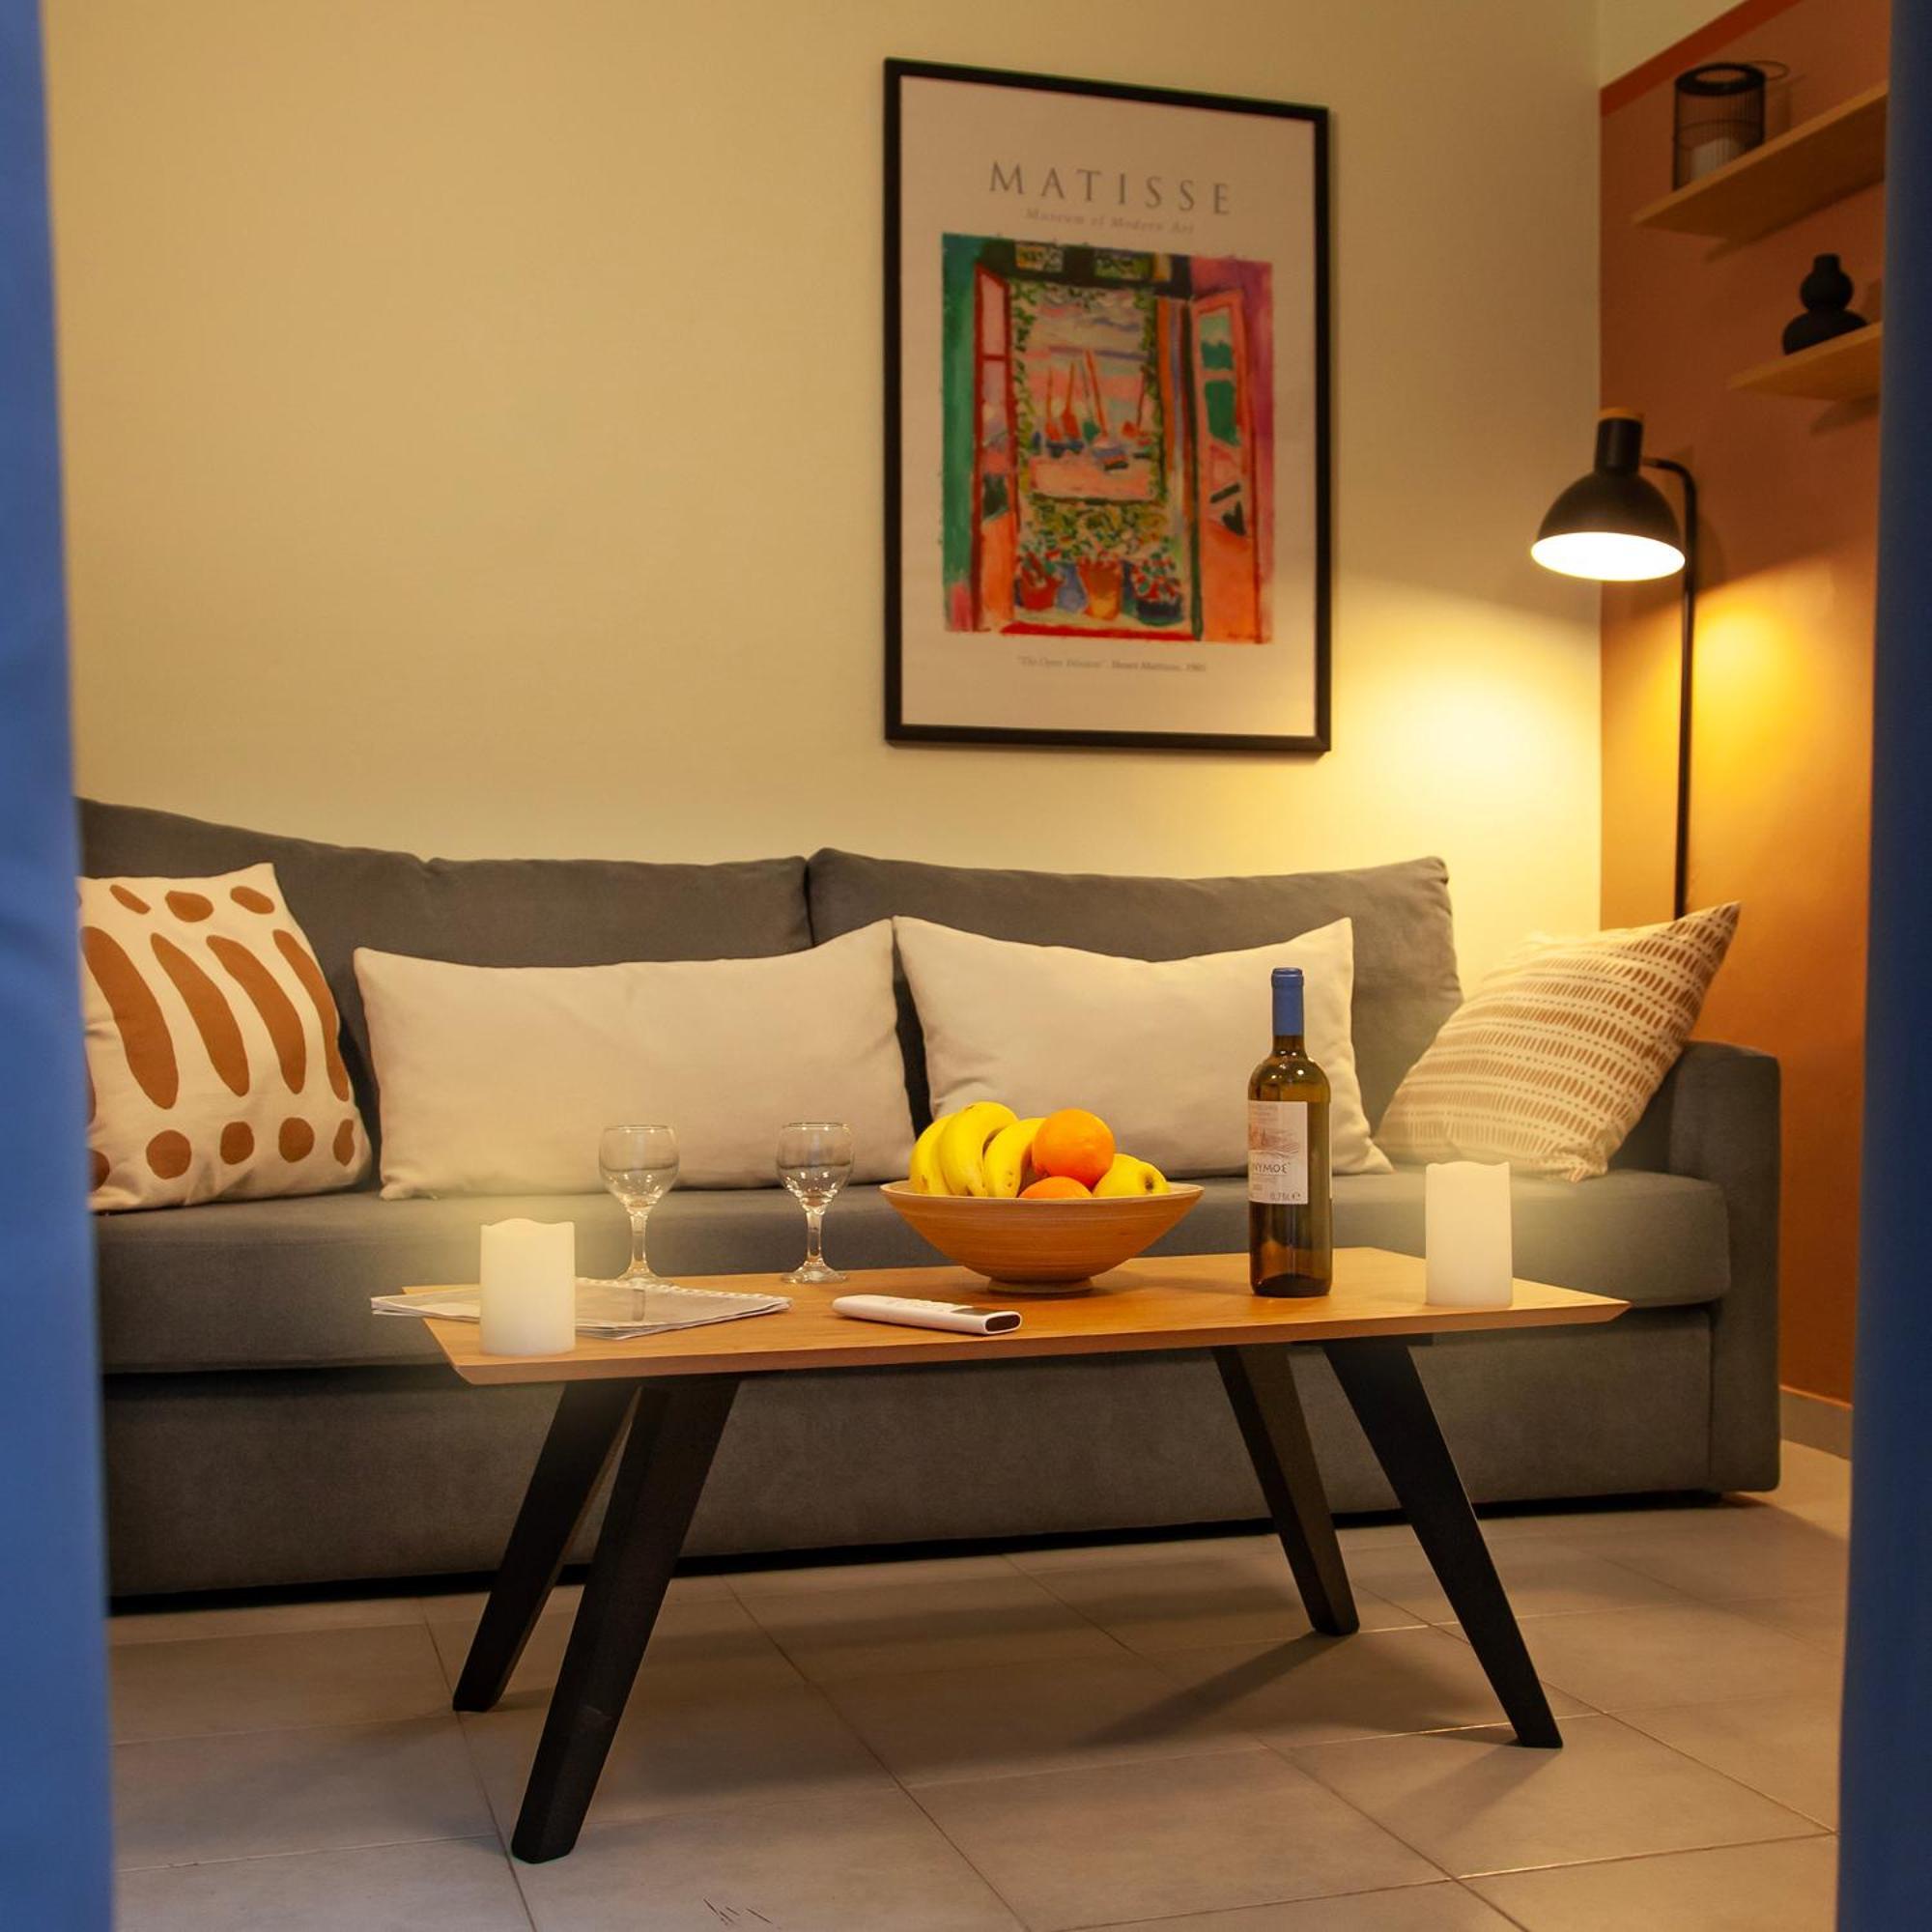 Aris123 By Smart Cozy Suites - Apartments In The Heart Of Athens - 5 Minutes From Metro - Available 24Hr Ngoại thất bức ảnh